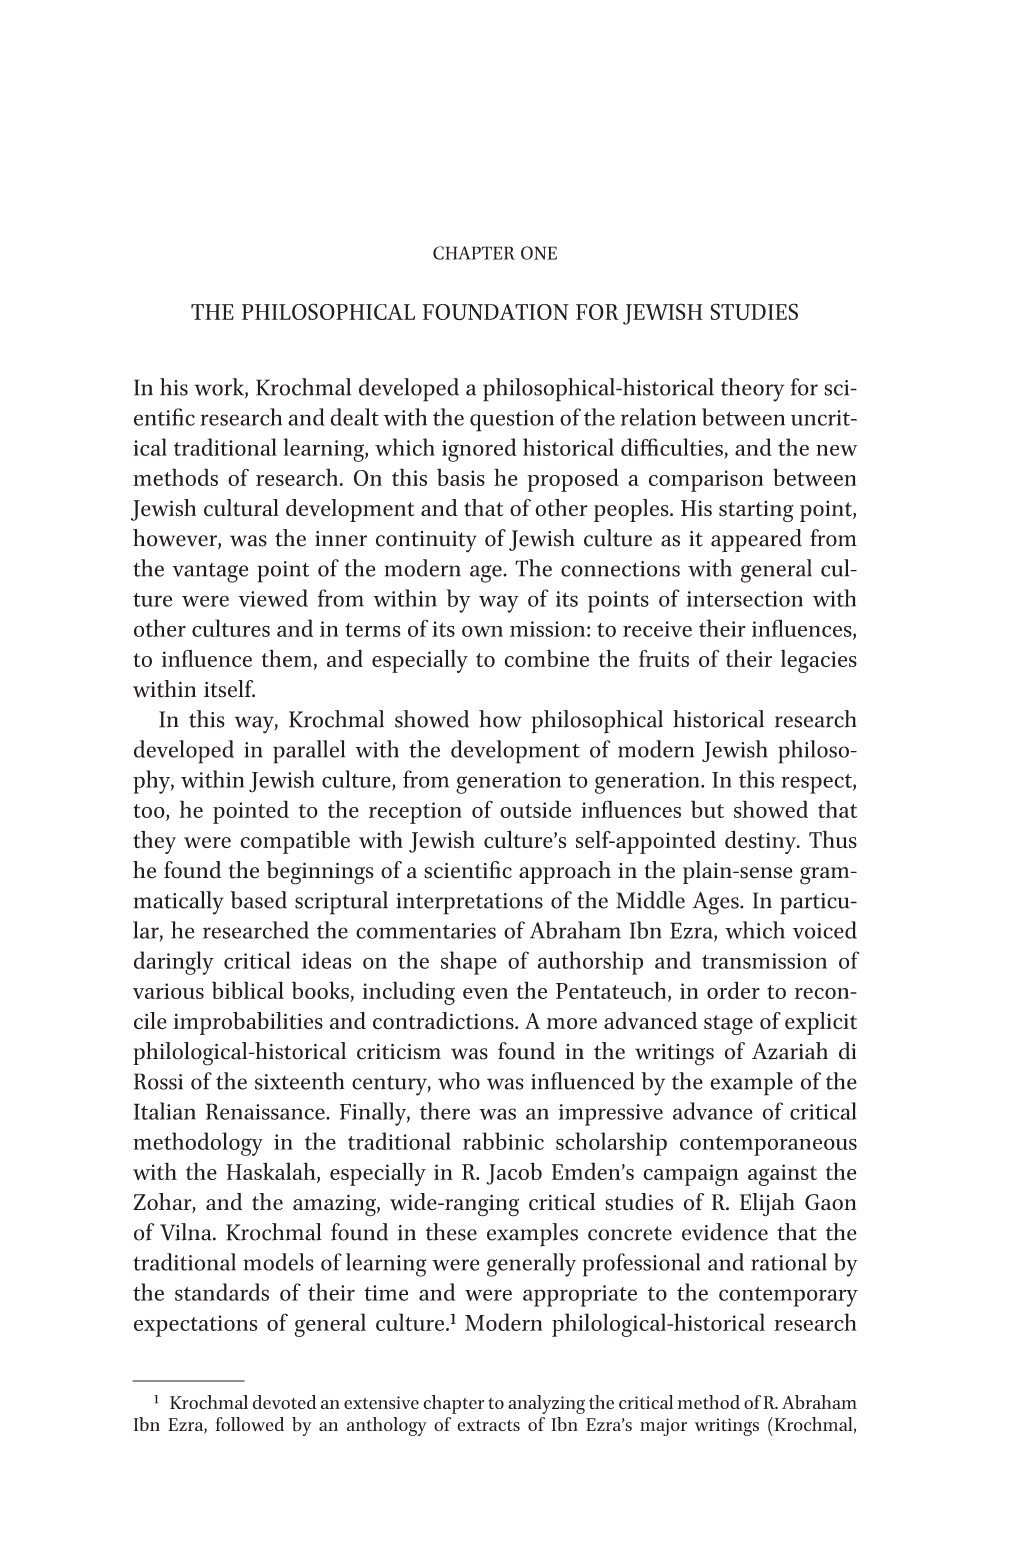 THE PHILOSOPHICAL FOUNDATION for JEWISH STUDIES in His Work